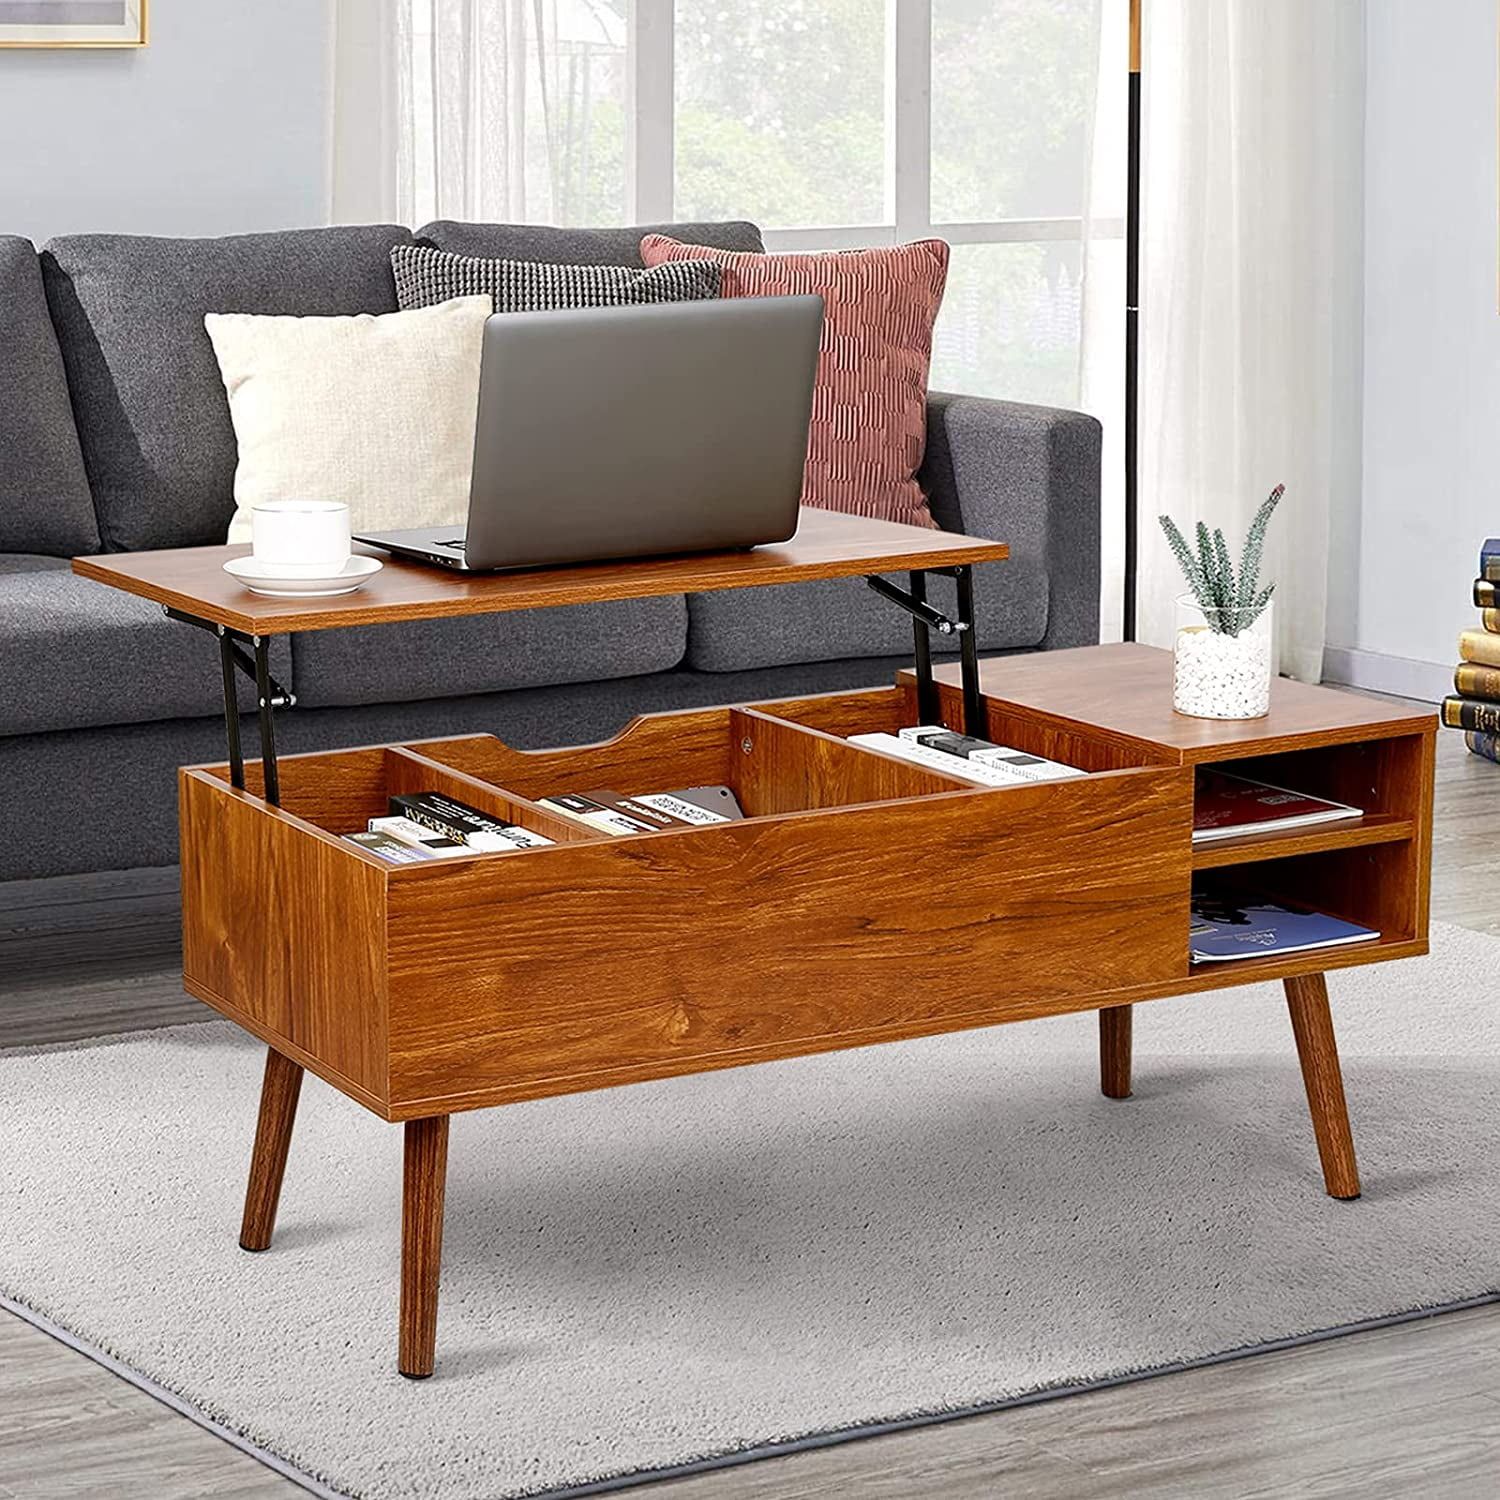 Modern Lift Top Coffee Table With Hidden Compartment Storage,adjustable In Lift Top Coffee Tables With Hidden Storage Compartments (View 2 of 15)